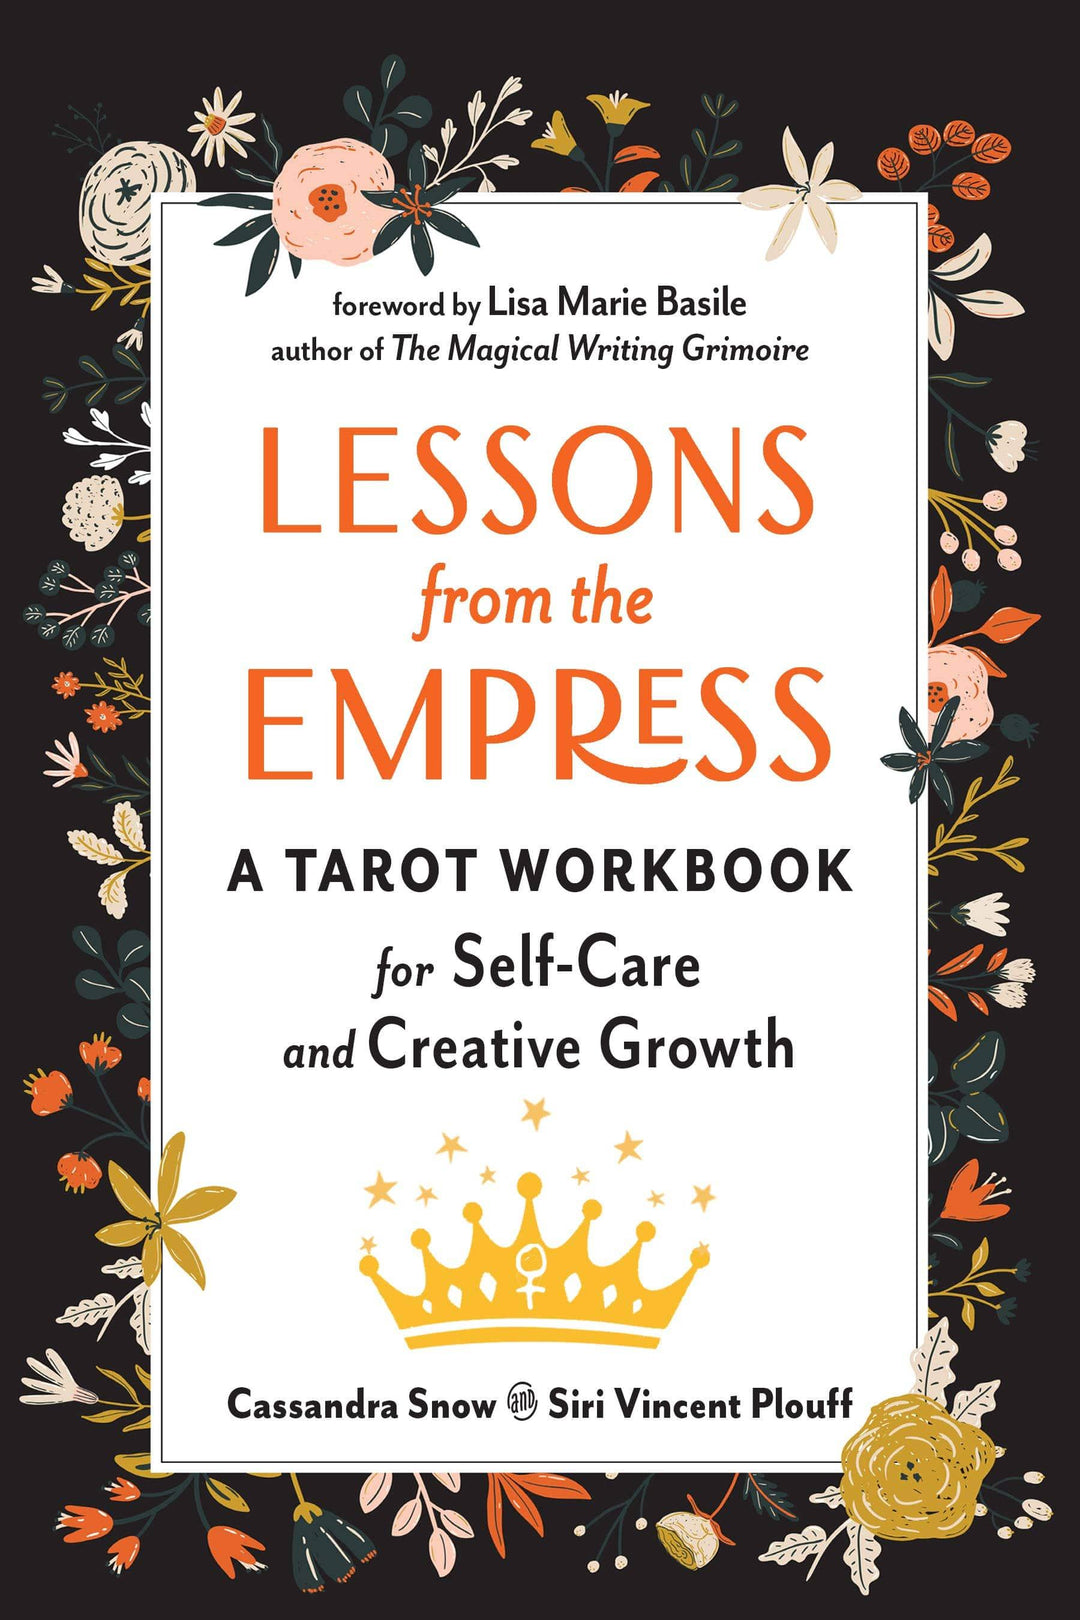 Lessons from the Empress: A Tarot Workbook for Self-Care... - Esme and Elodie